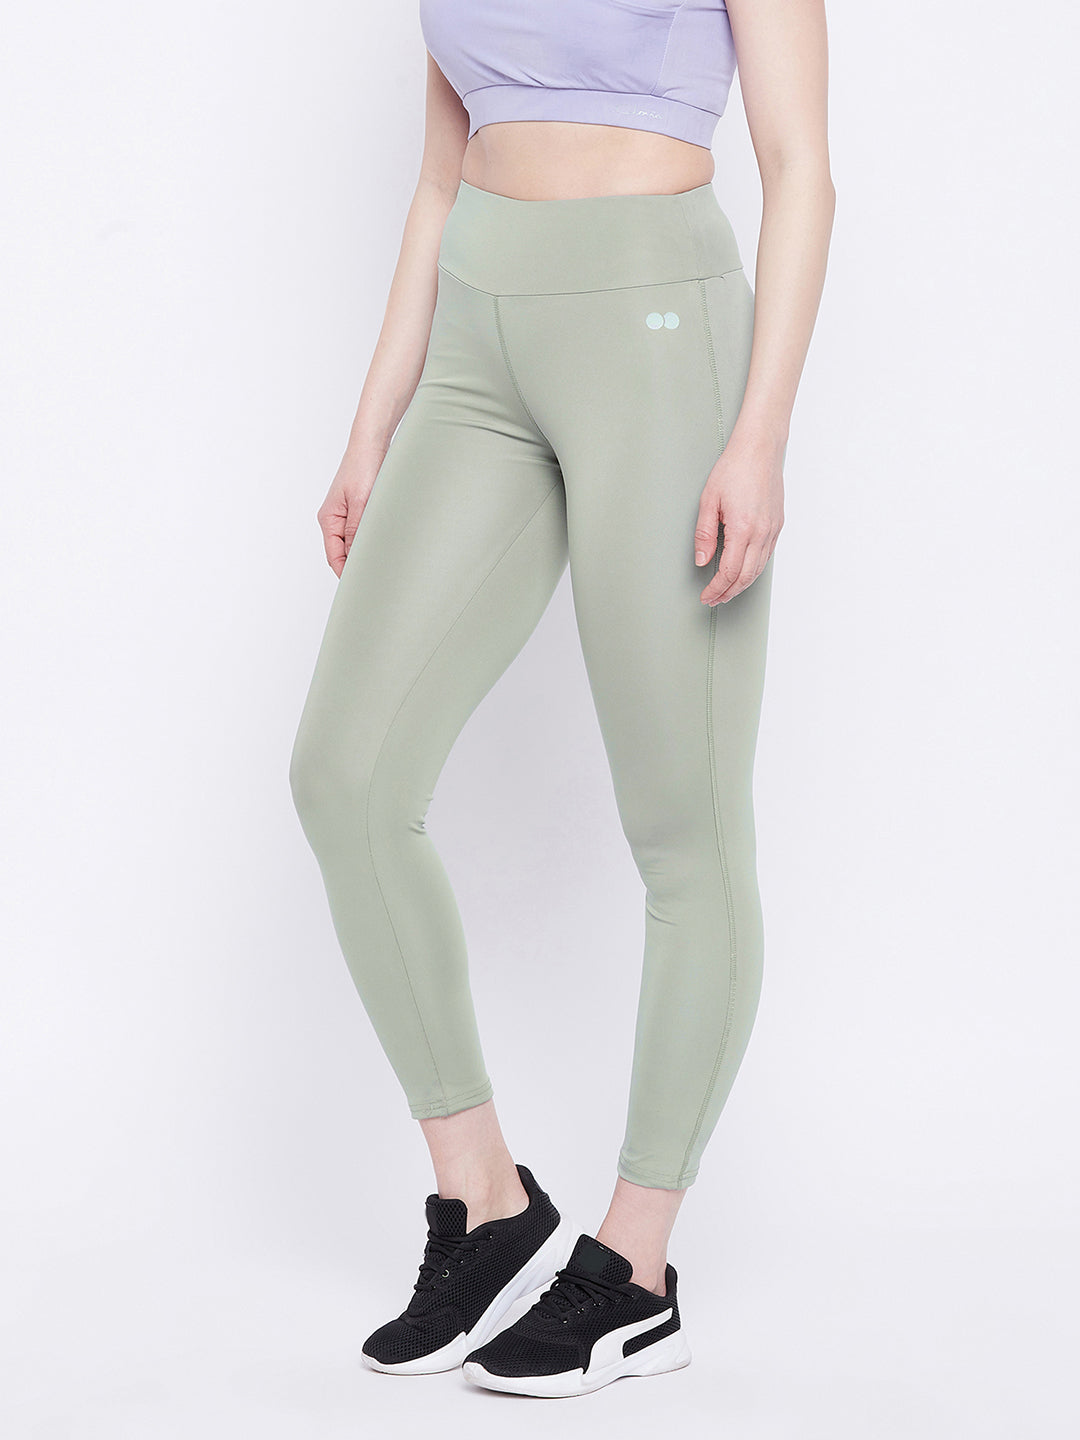 Snug Fit High Rise Tights In Sage Green